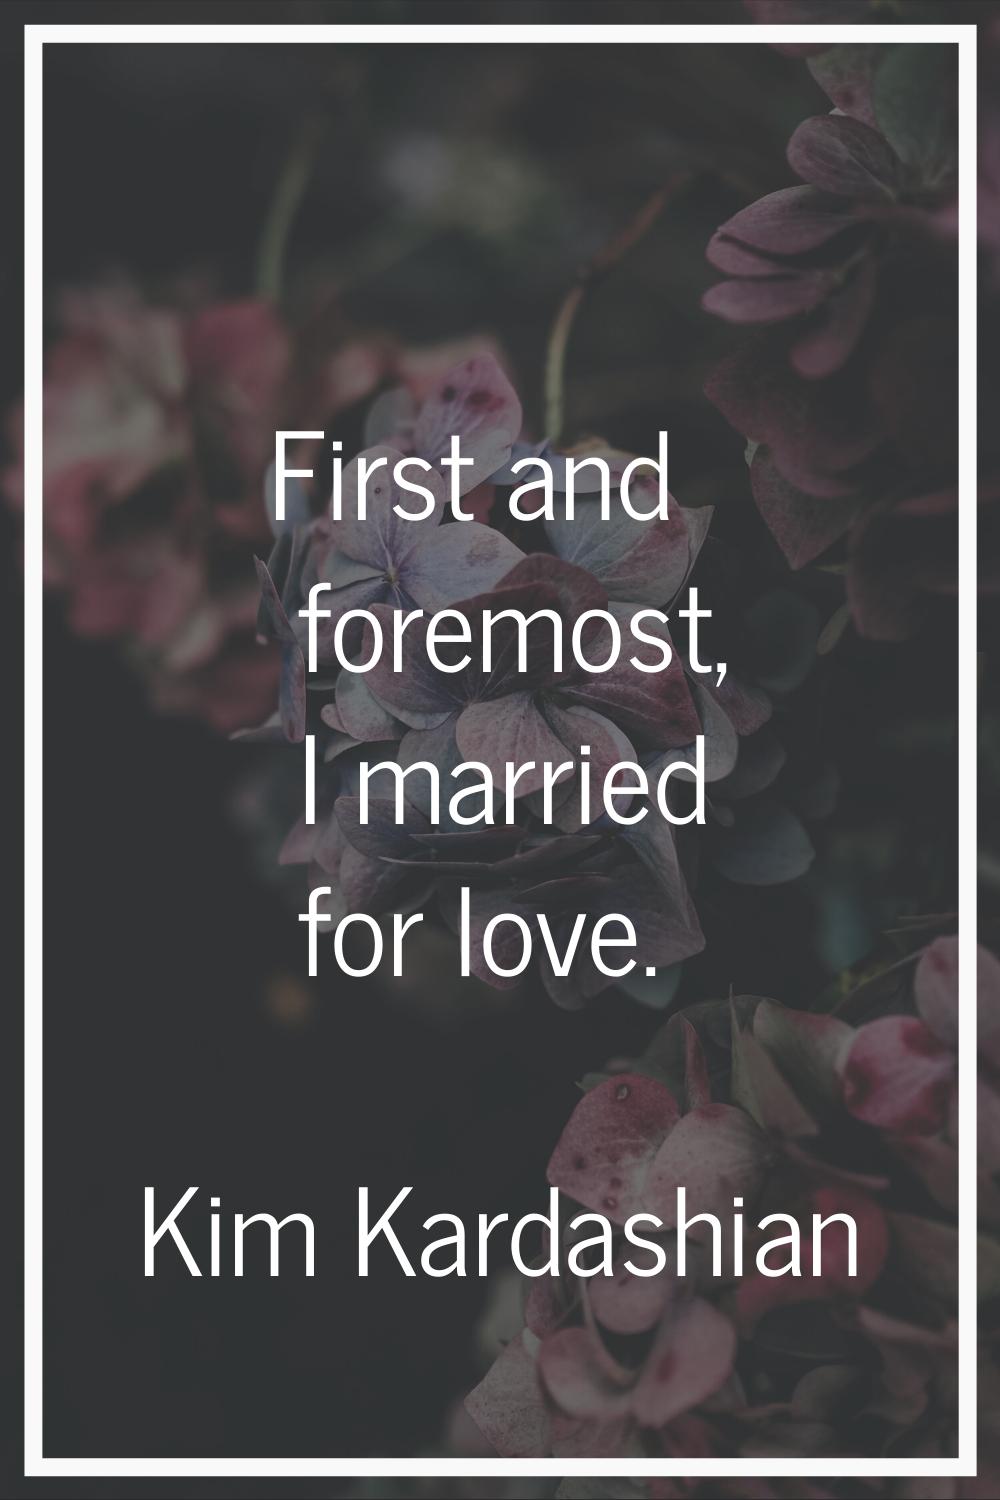 First and foremost, I married for love.